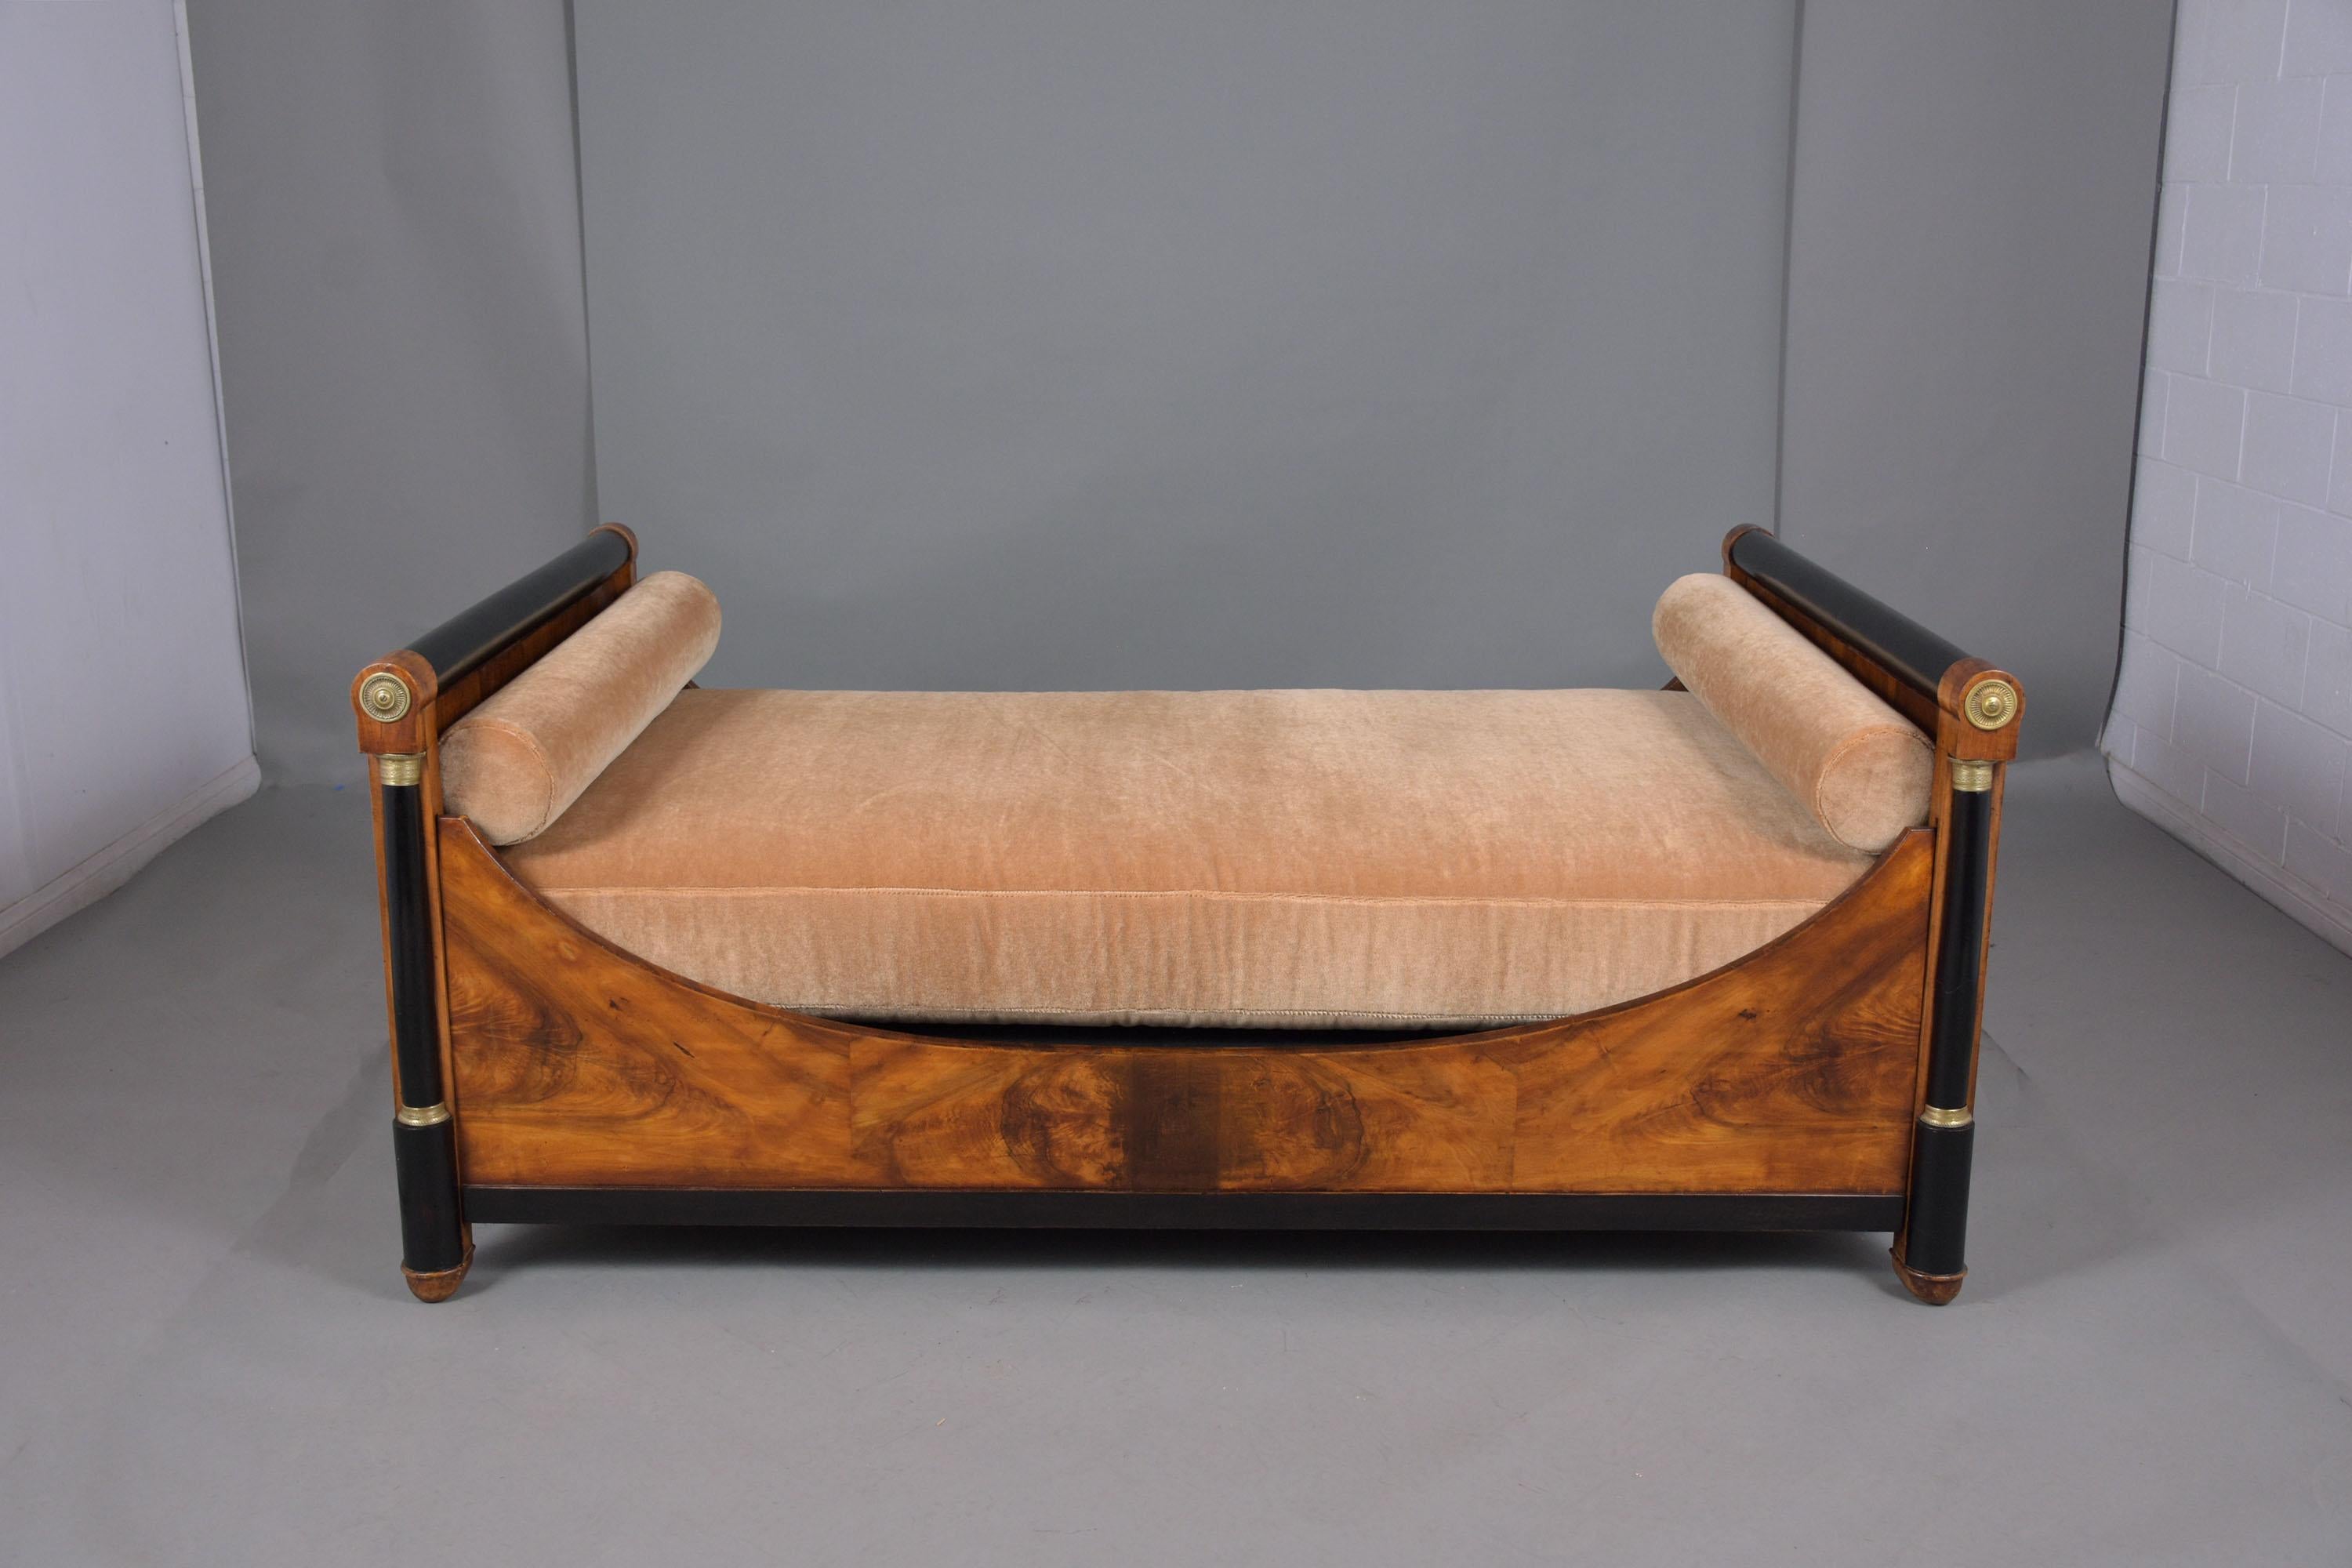 An extraordinary late 18th-century empire daybed handcrafted out of walnut wood and been professionally restored by our team of in-house craftsmen. This elegant daybed features a straigh headboard front columns with bronze ornaments, and molding